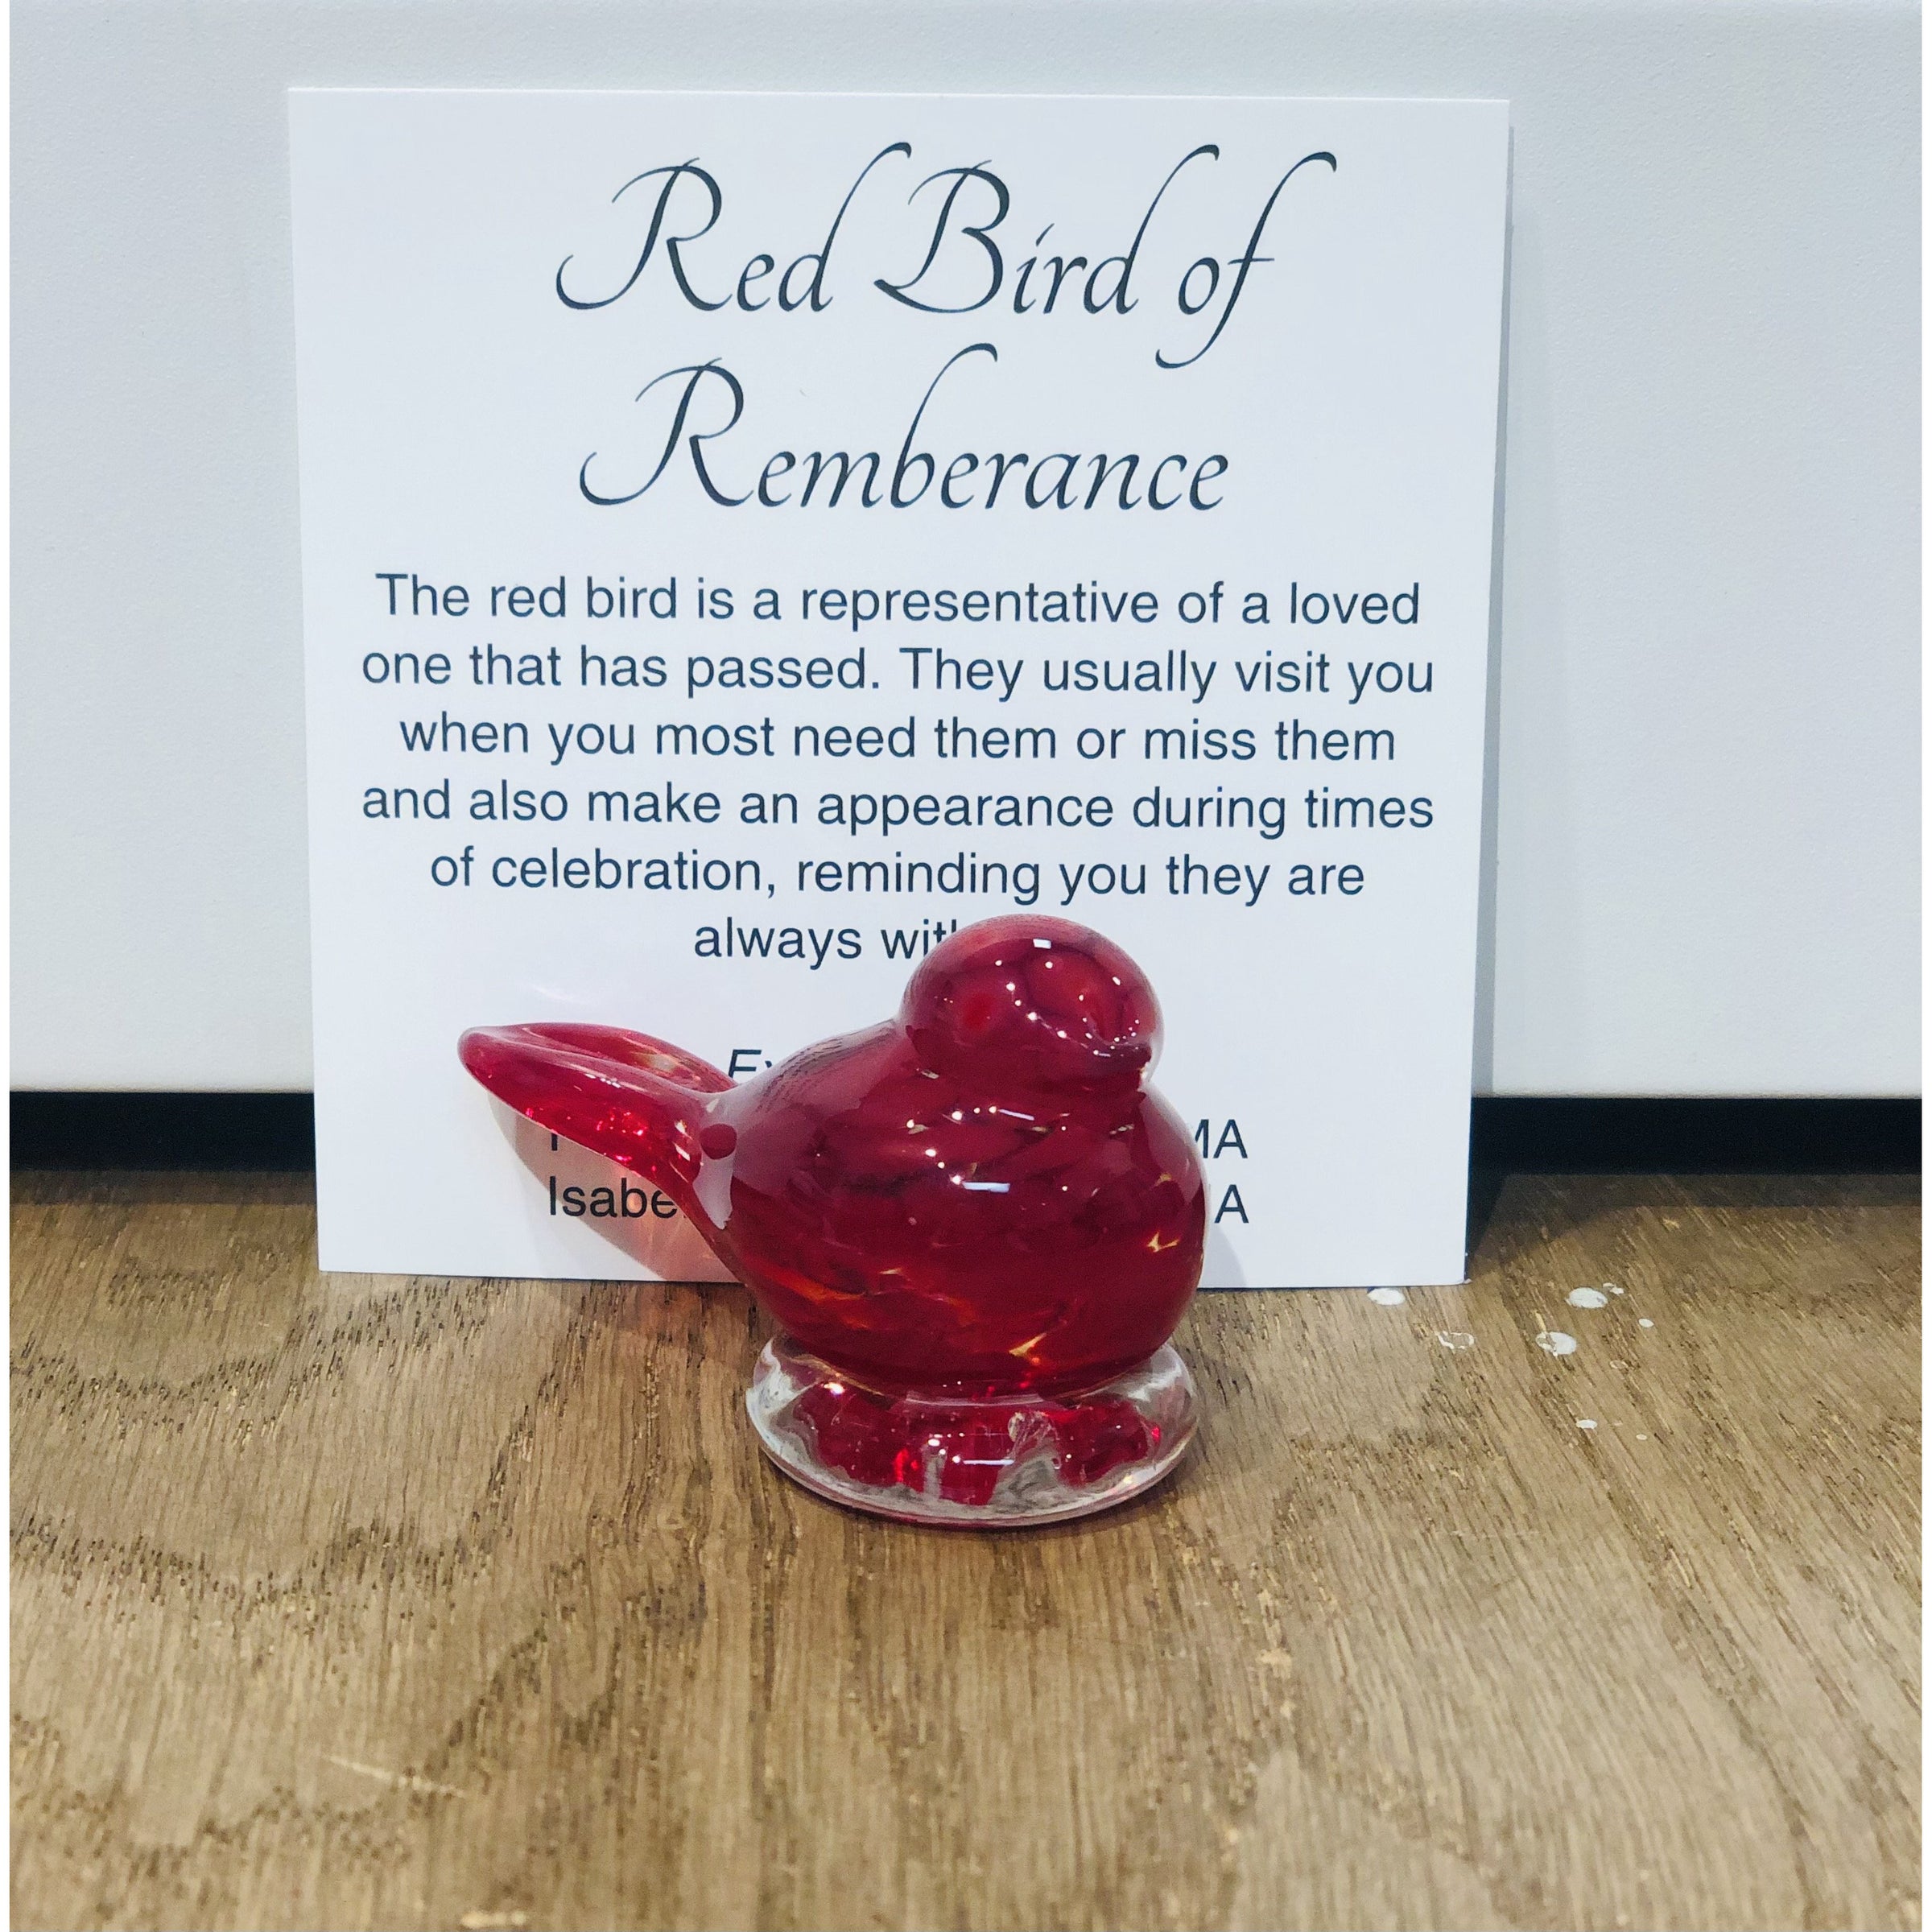 The Red Bird Of Rememberance